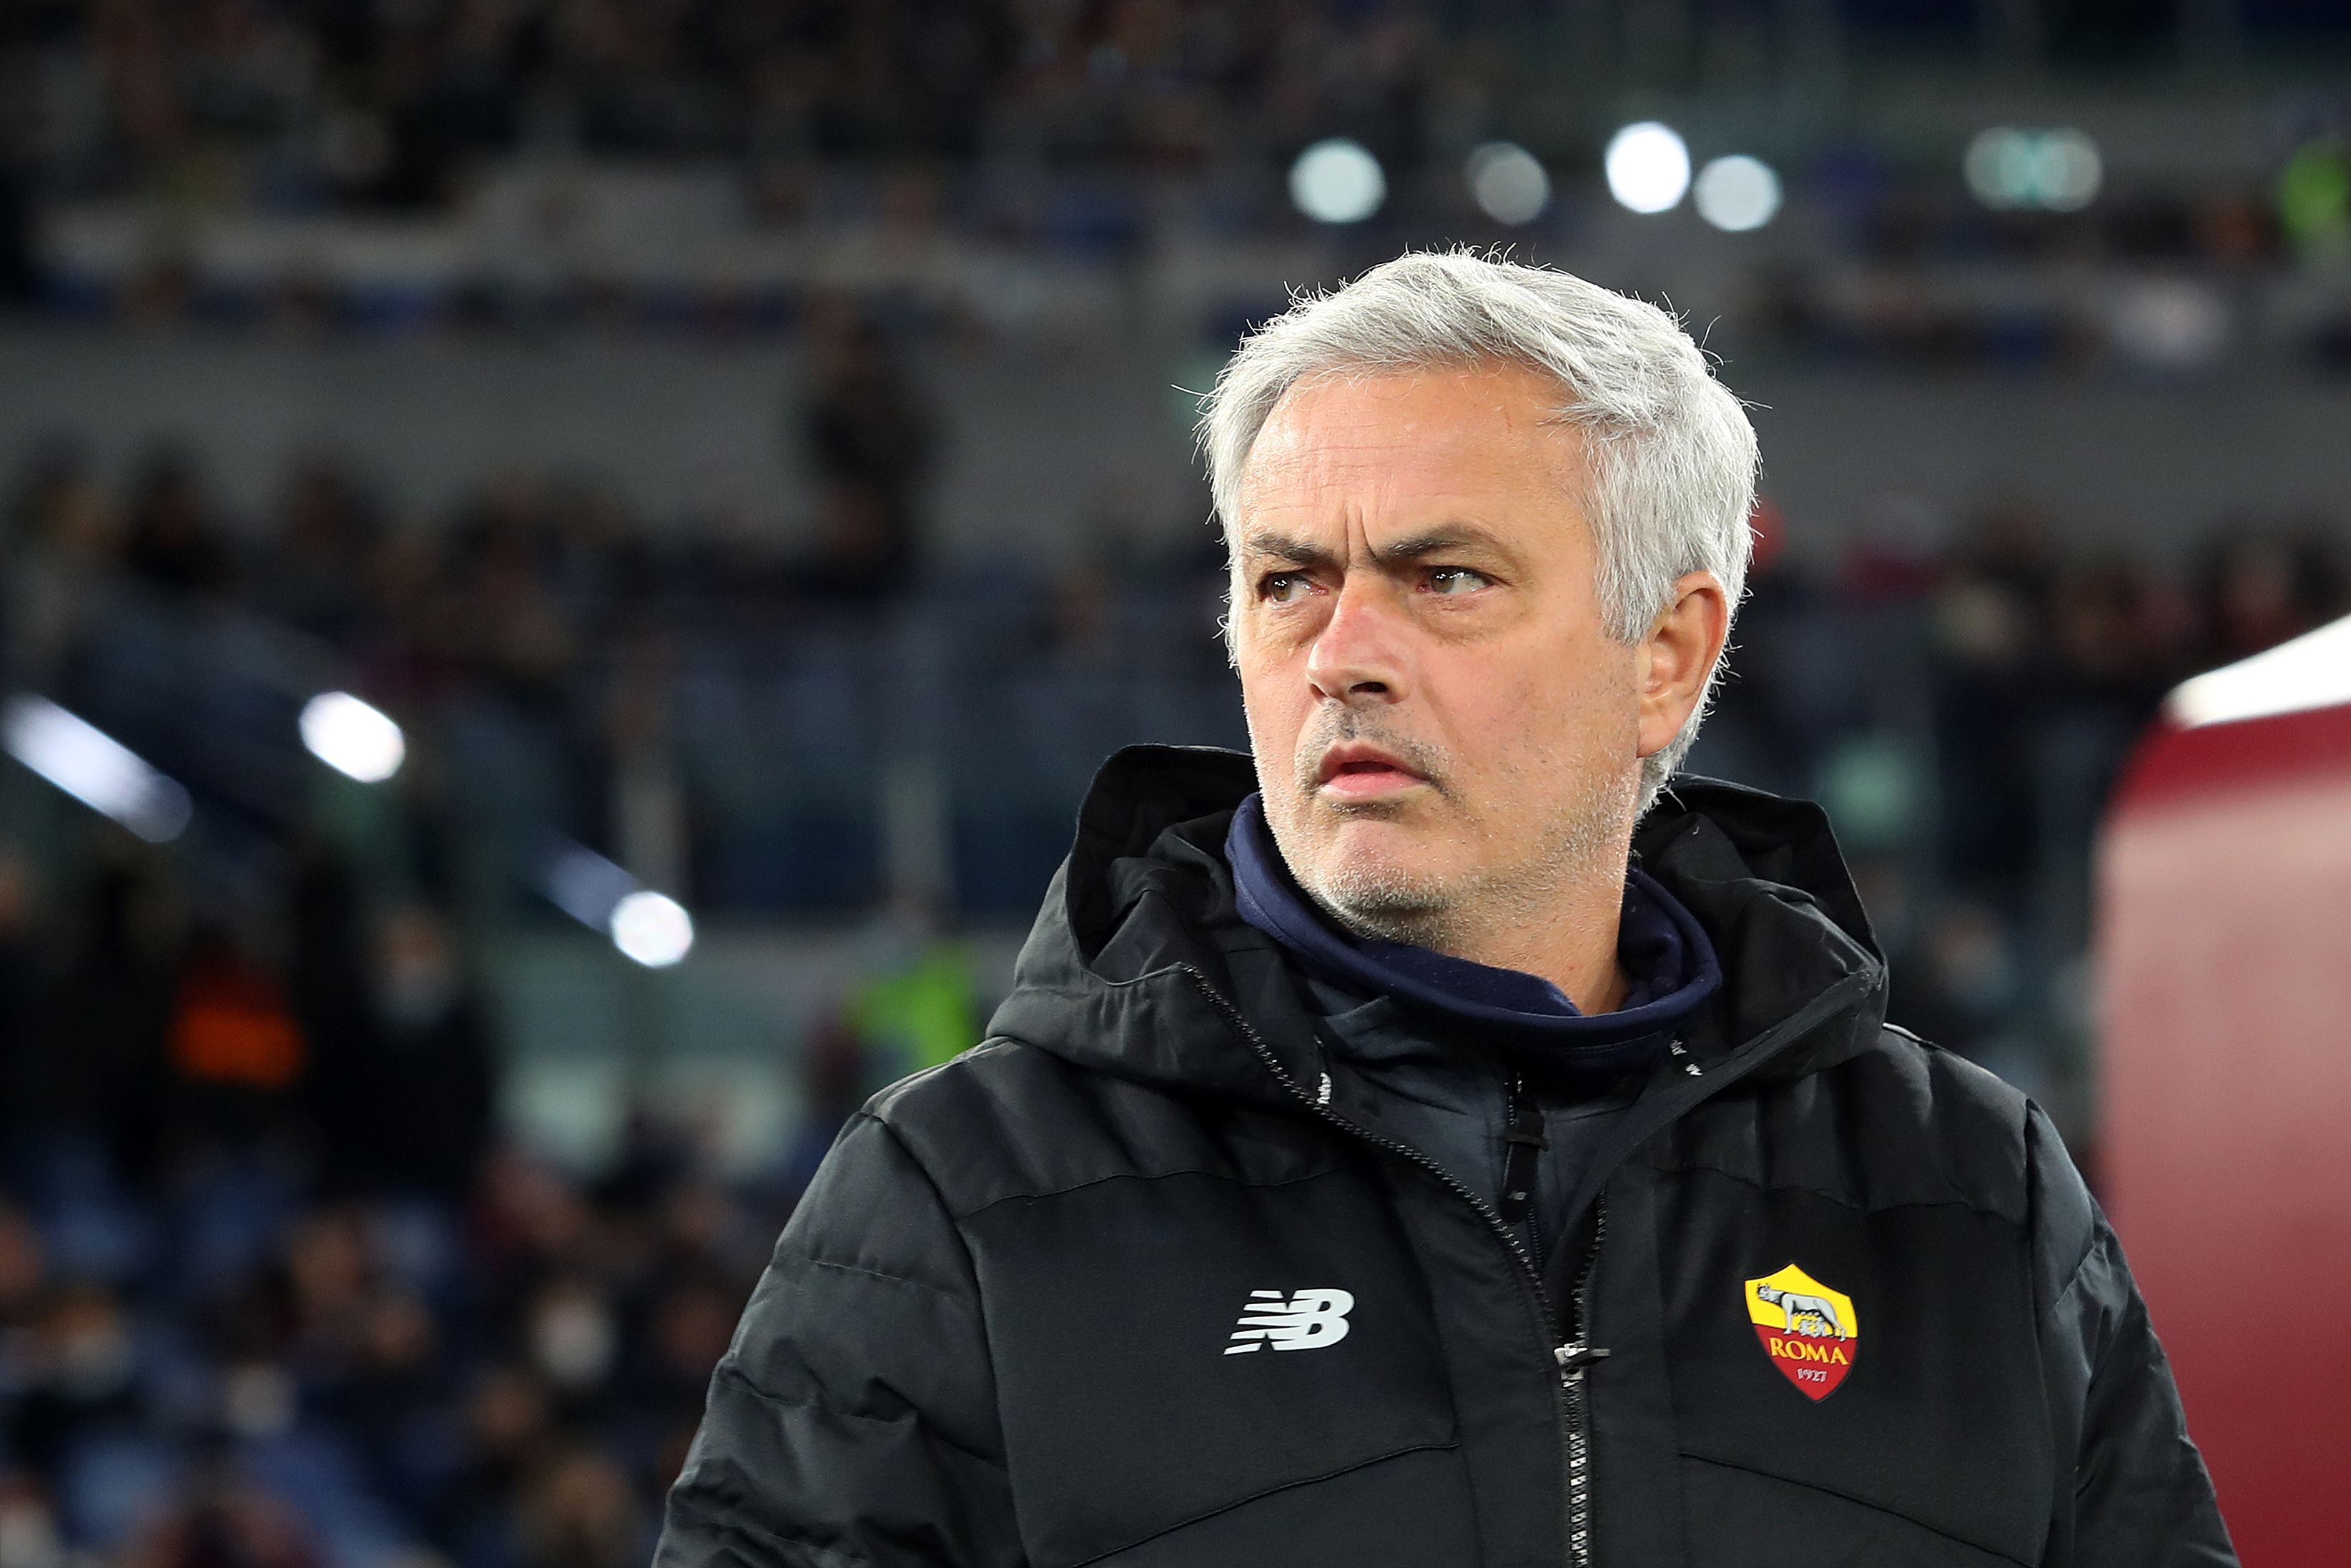 Only want to remain at Roma as we can build strong project here, insists Jose Mourinho